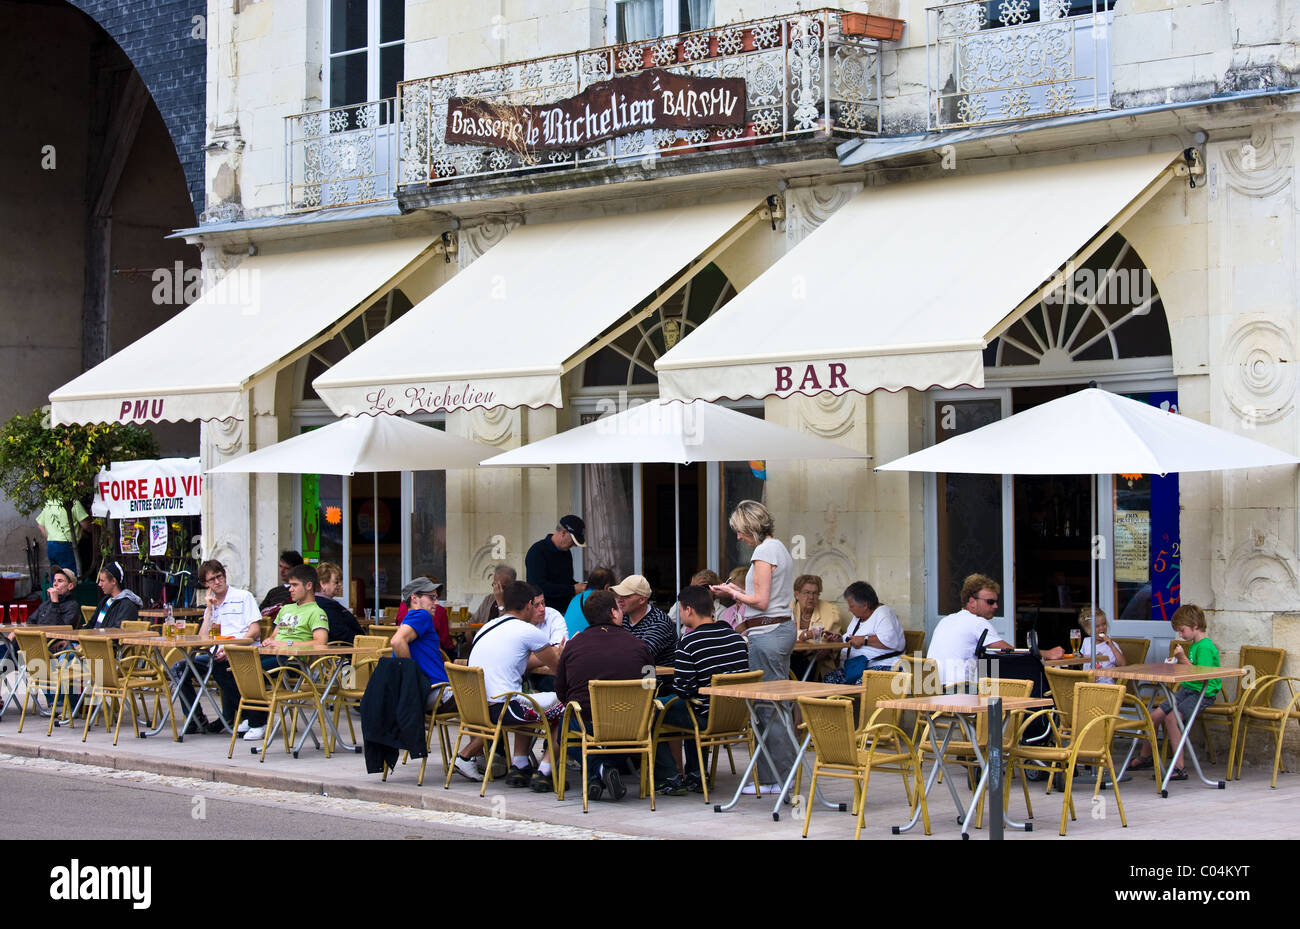 Diners at Le Richelieu Bar and Brasserie in Place du Marche in town of Richelieu, Loire Valley, Indre et Loire, France Stock Photo